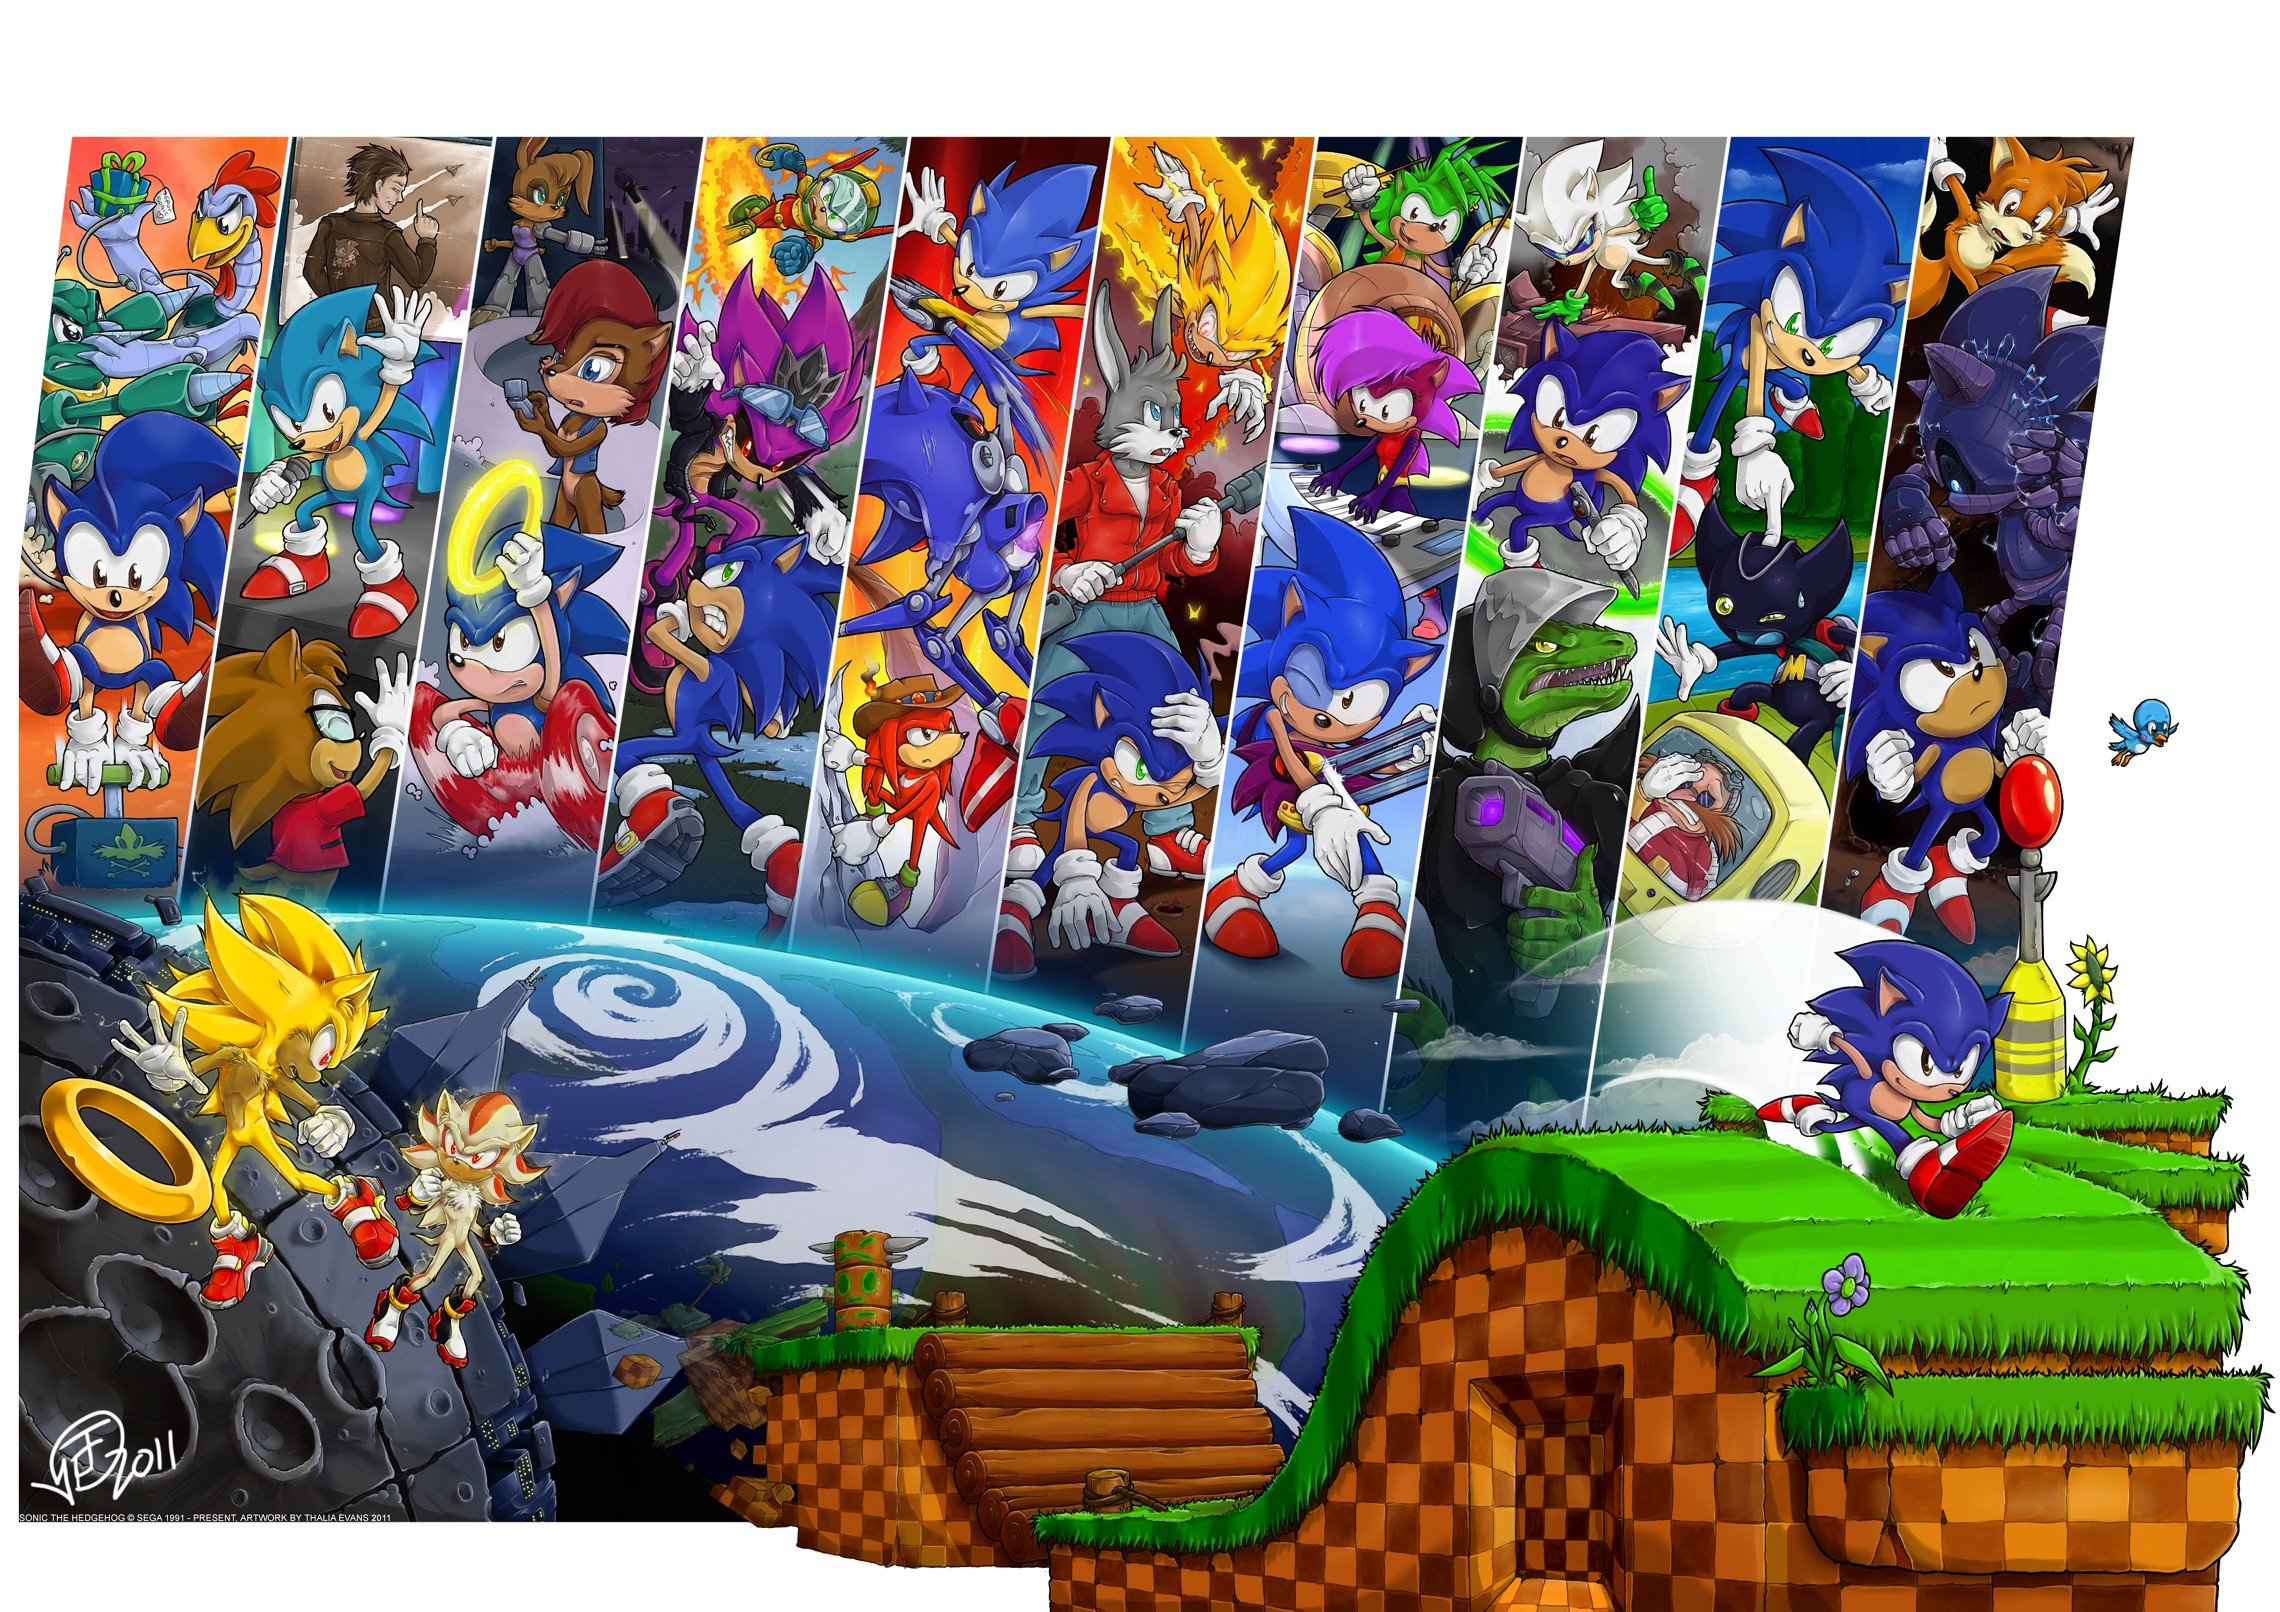 Tails (character), Sonic, Sonic the Hedgehog, Metal Sonic, Shadow the Hedgehog, Knuckles Wallpaper